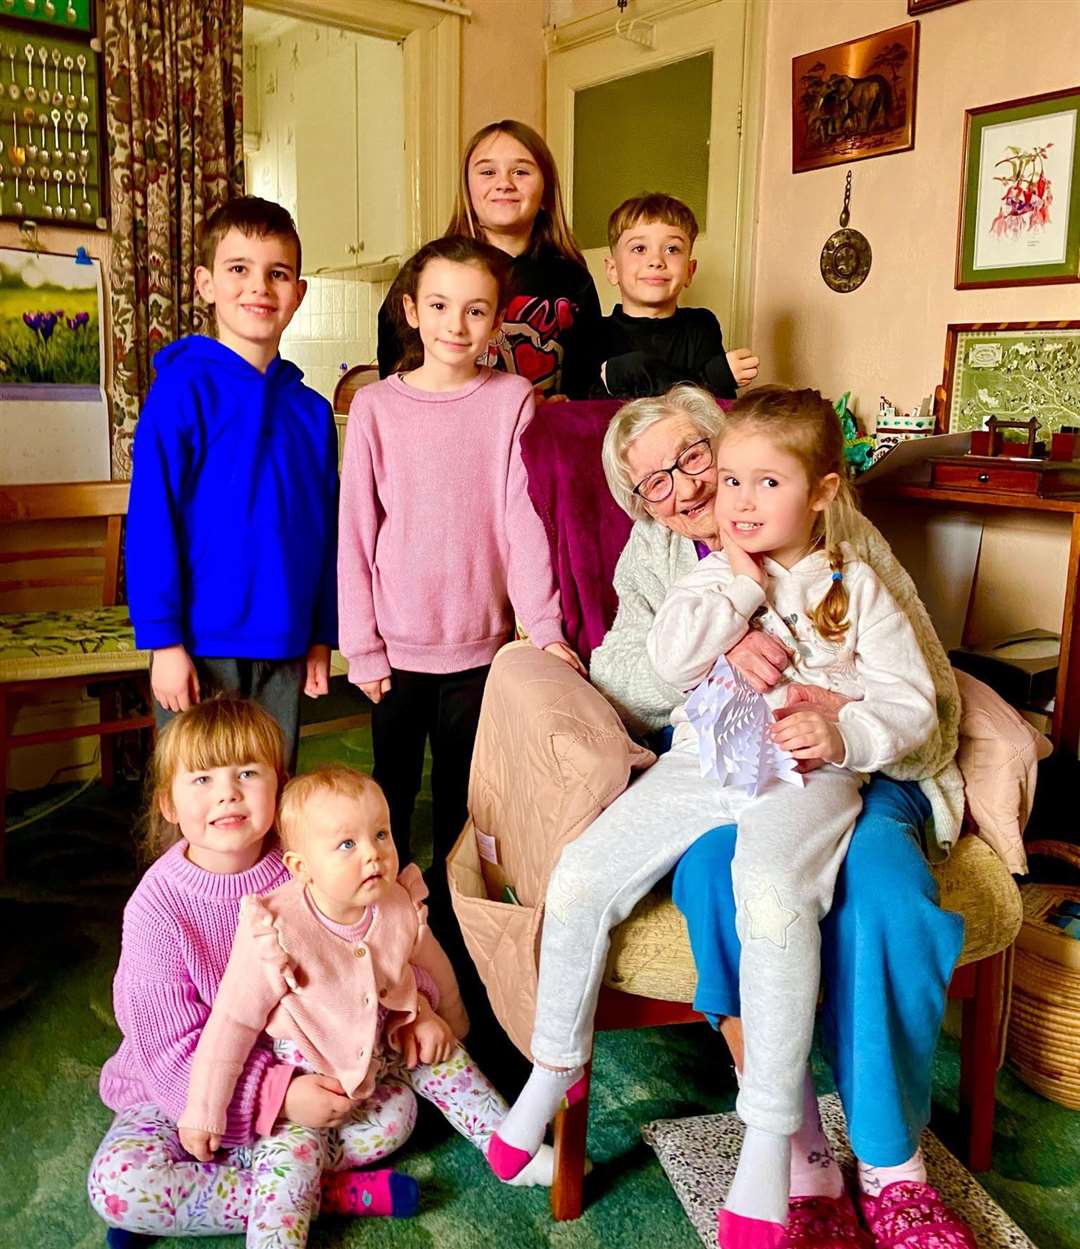 Hilda Luck surrounded by all her great-grandchildren. Back row: Olivier & Cooper, middle row: Cody, Sophia Hilda and Evelynfront row: Eliza and Rosie. Photo credit: Ronnie Luck